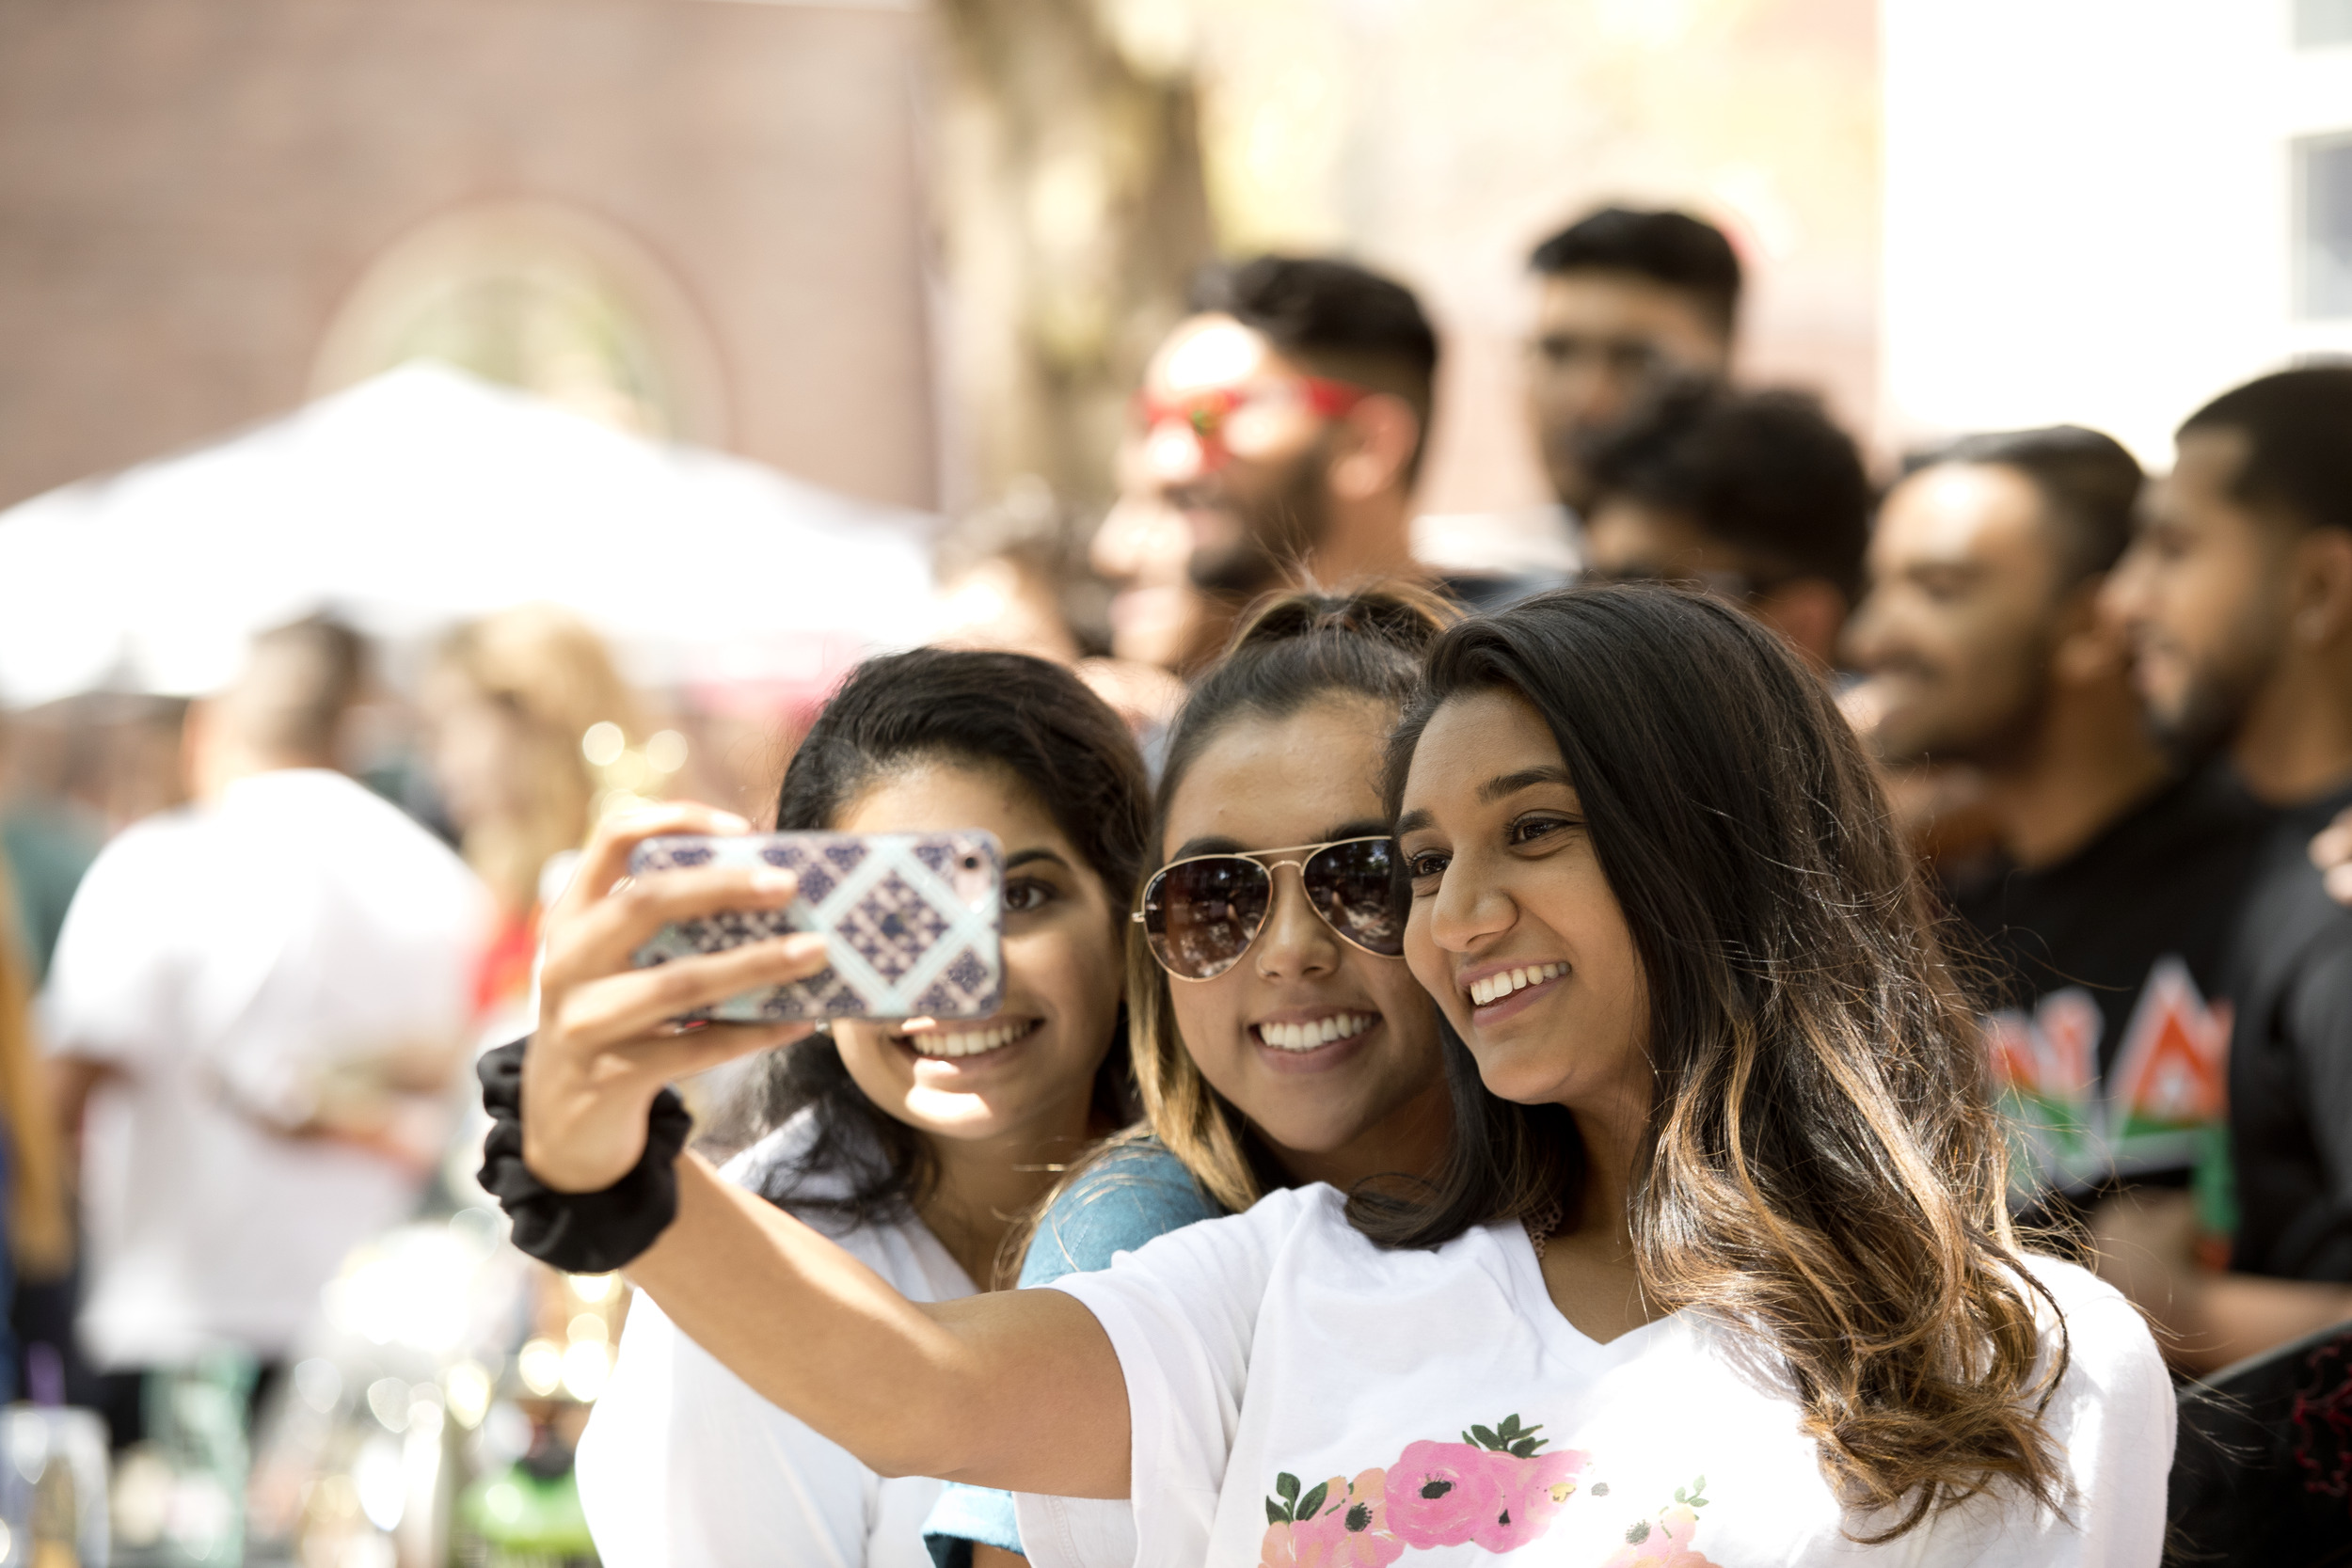 Students taking a selfie together outside